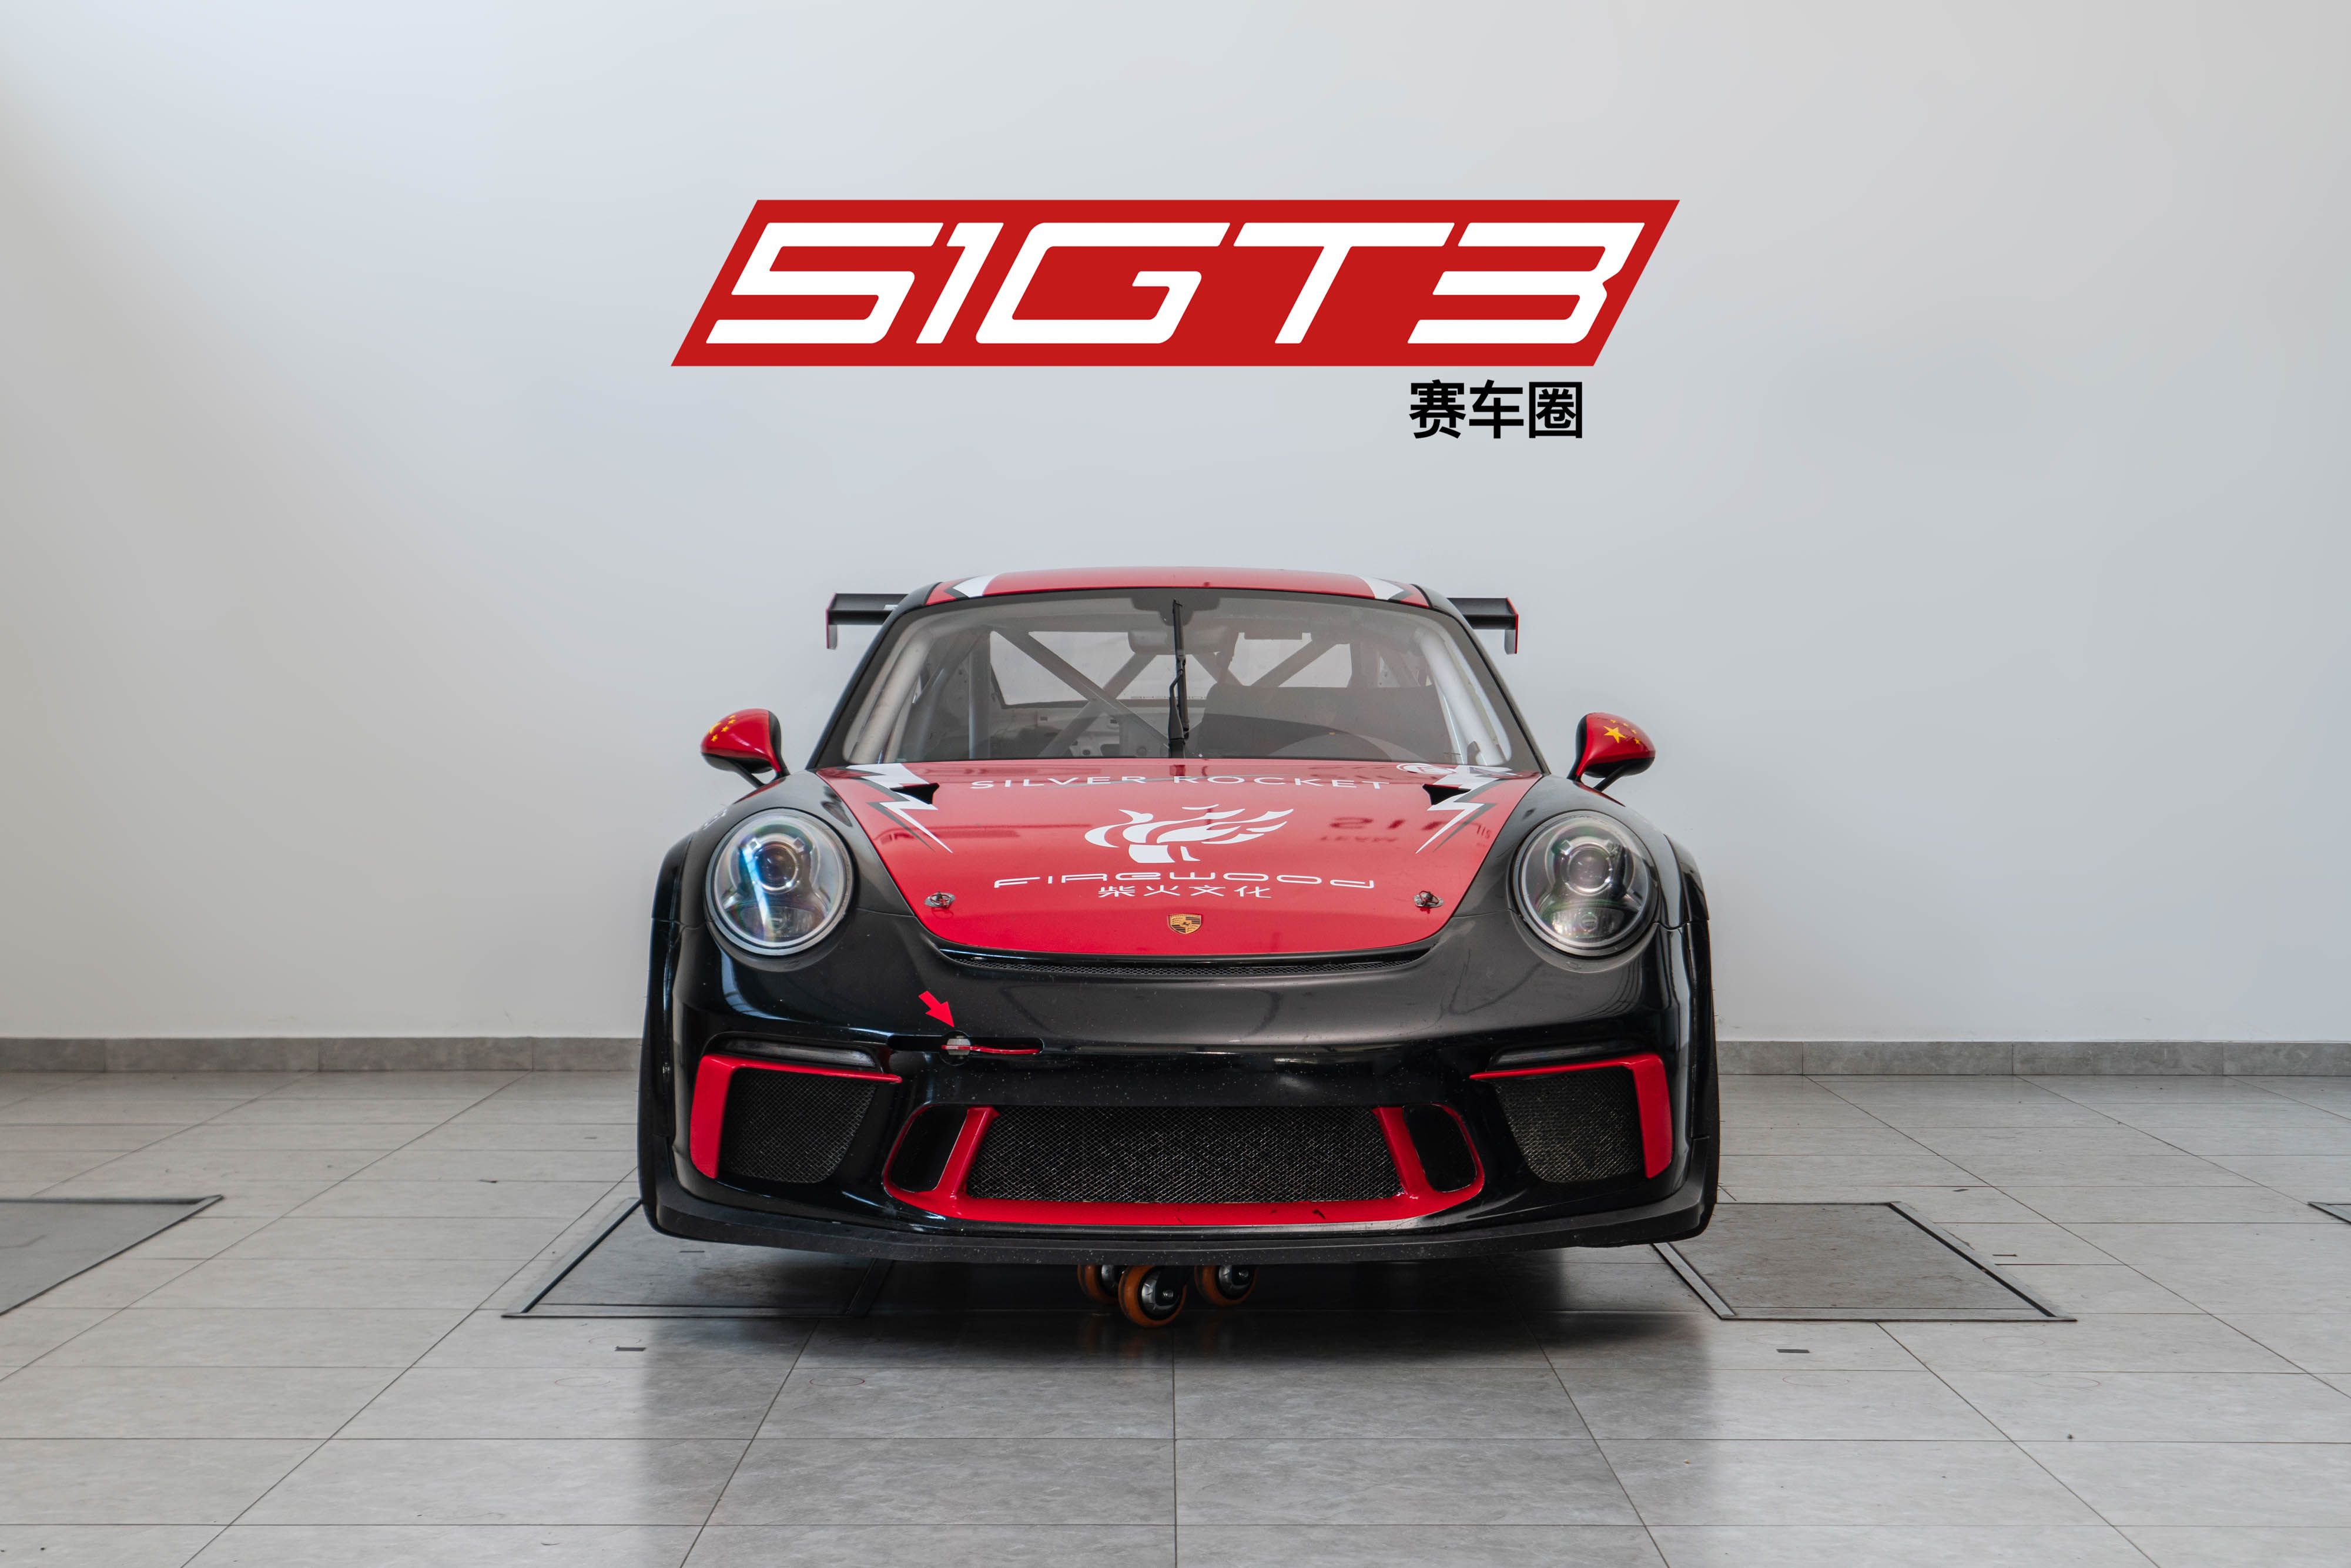 2019 Porsche 911 GT3 CUP (Type 991.2, with ABS）-English Version